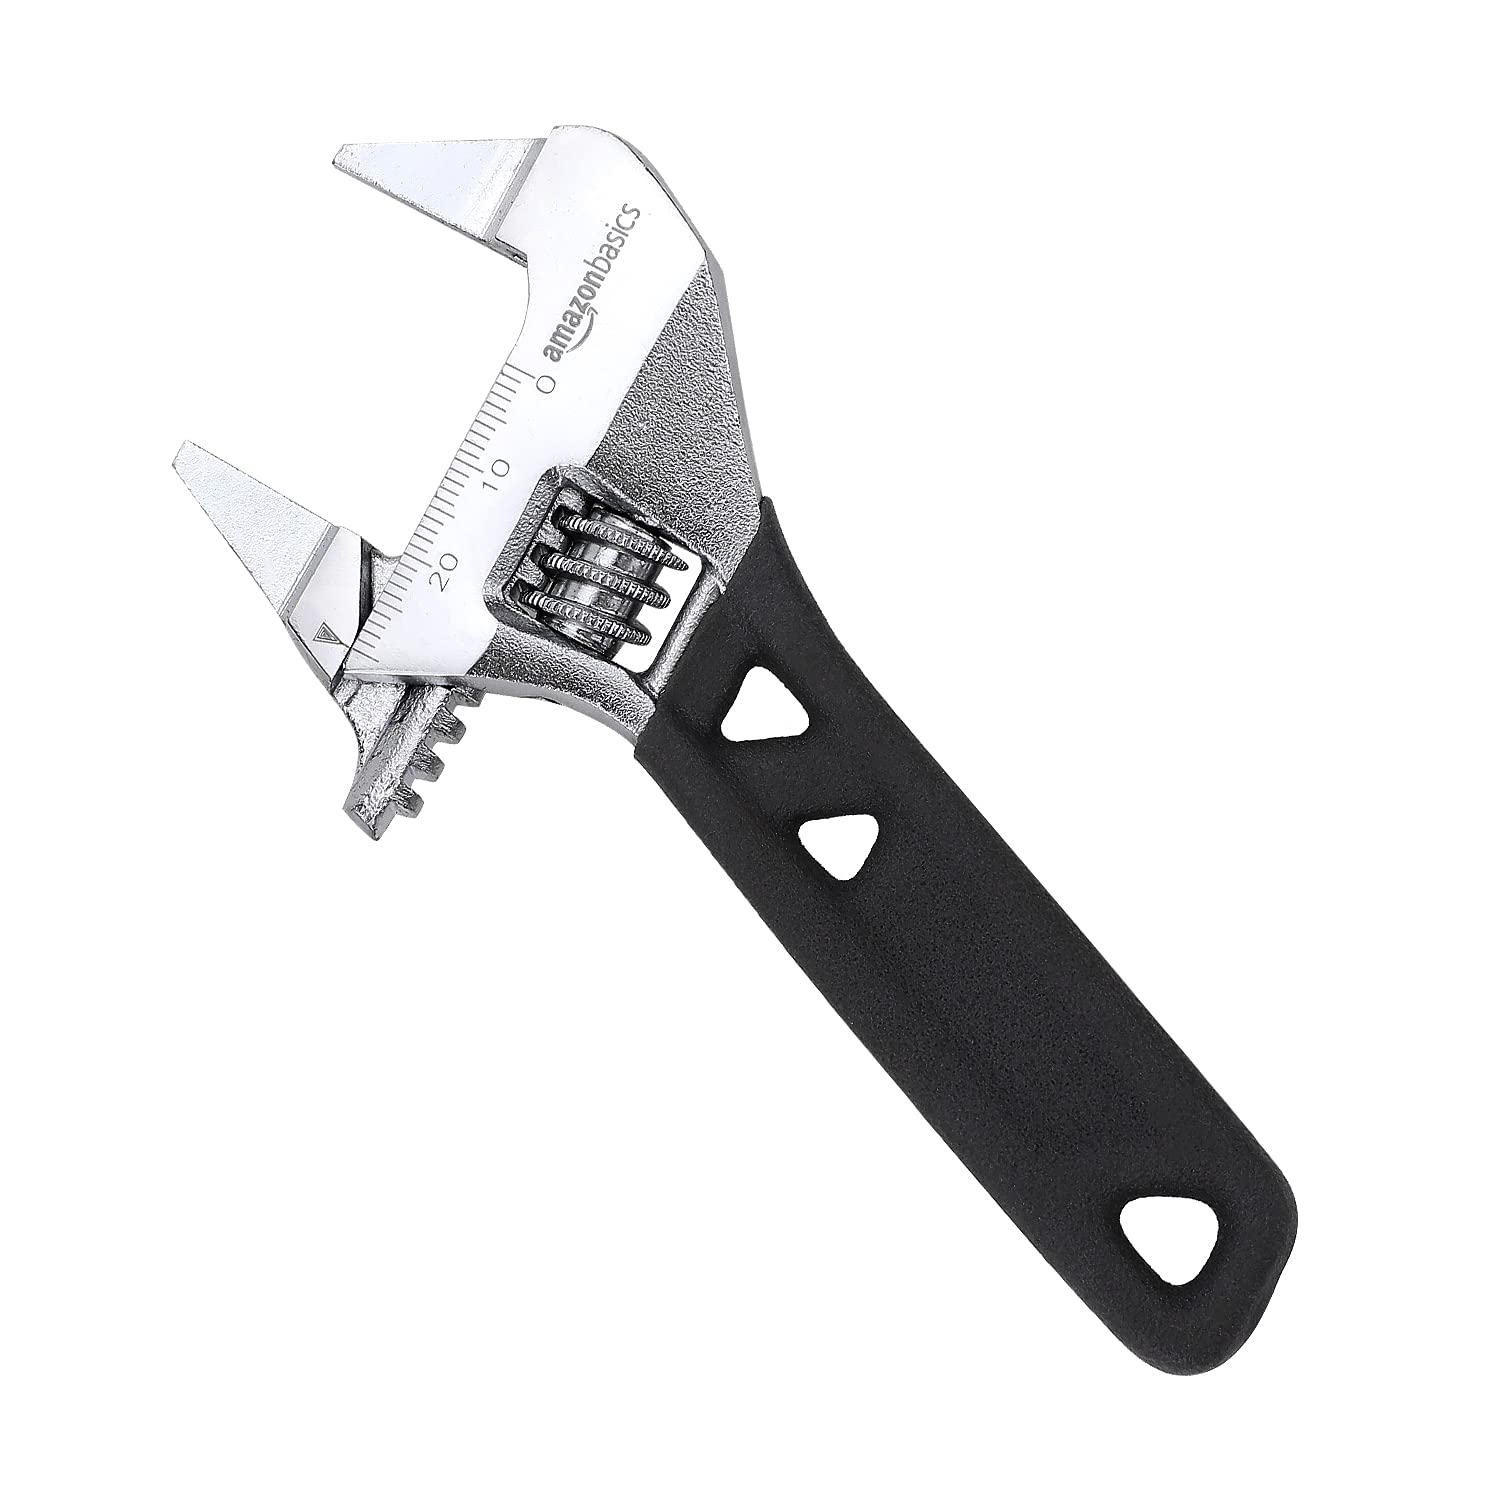 Amazon Basics 5.5-Inch Slim Jaw Adjustable Wrench with Inch/Metric Scale ($7.35 w/ Free Prime Ship)